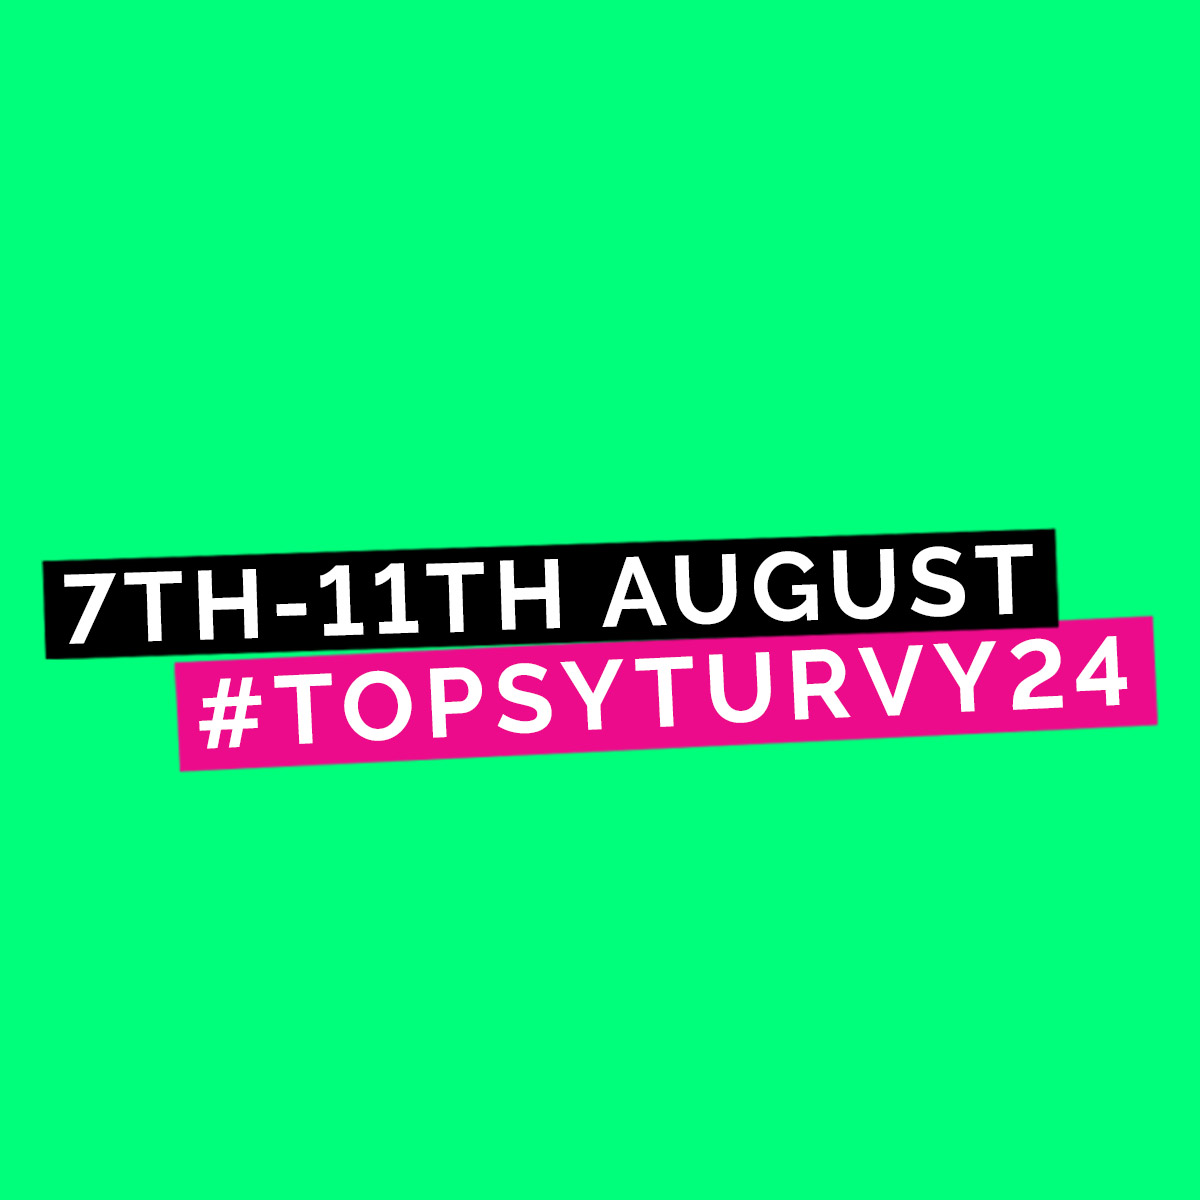 Save The Date! 'Topsy Turvy' is back for 2024... Theatre Porto's spectacular arts celebration returns to #WhitbyPark #EllesmerePort #Cheshire… 7th to 11th August! MORE > theatreporto.org/topsyturvy24/
 
#TopsyTurvy24 #LetsCreate #CheshireArts #FamilyFun #SummerFun #Theatre #RT #Share